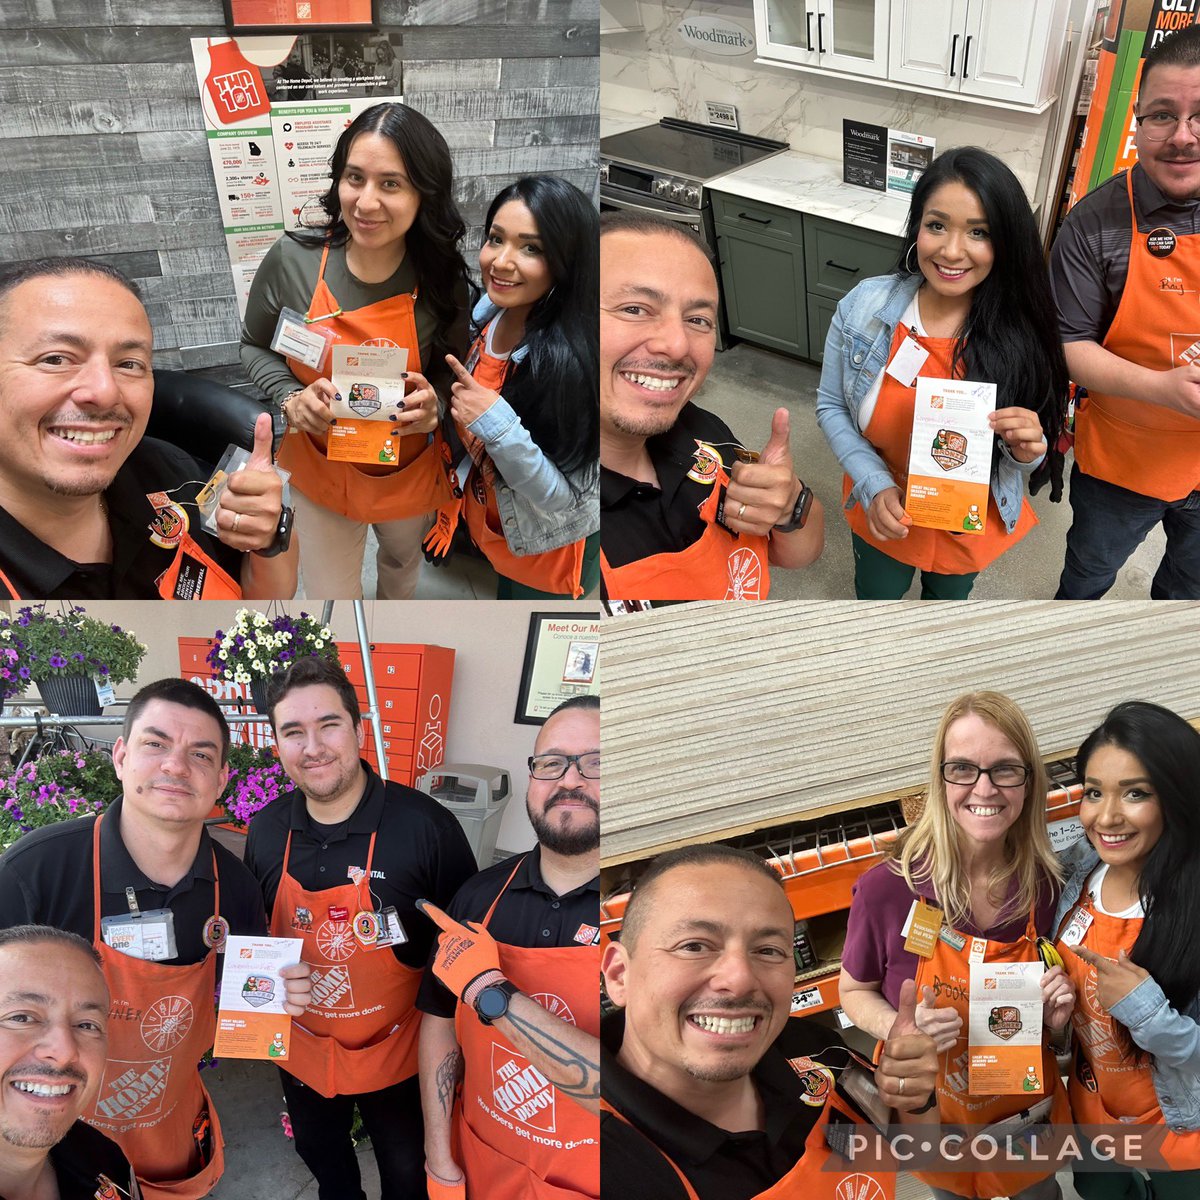 Milestones celebration weekend. Shout out to Julie, Monica,Tanner, and Brooke on reaching your bronze and silver milestones. Thank you for all you do to drive that customer experience.  #milestone #CustomerExperience